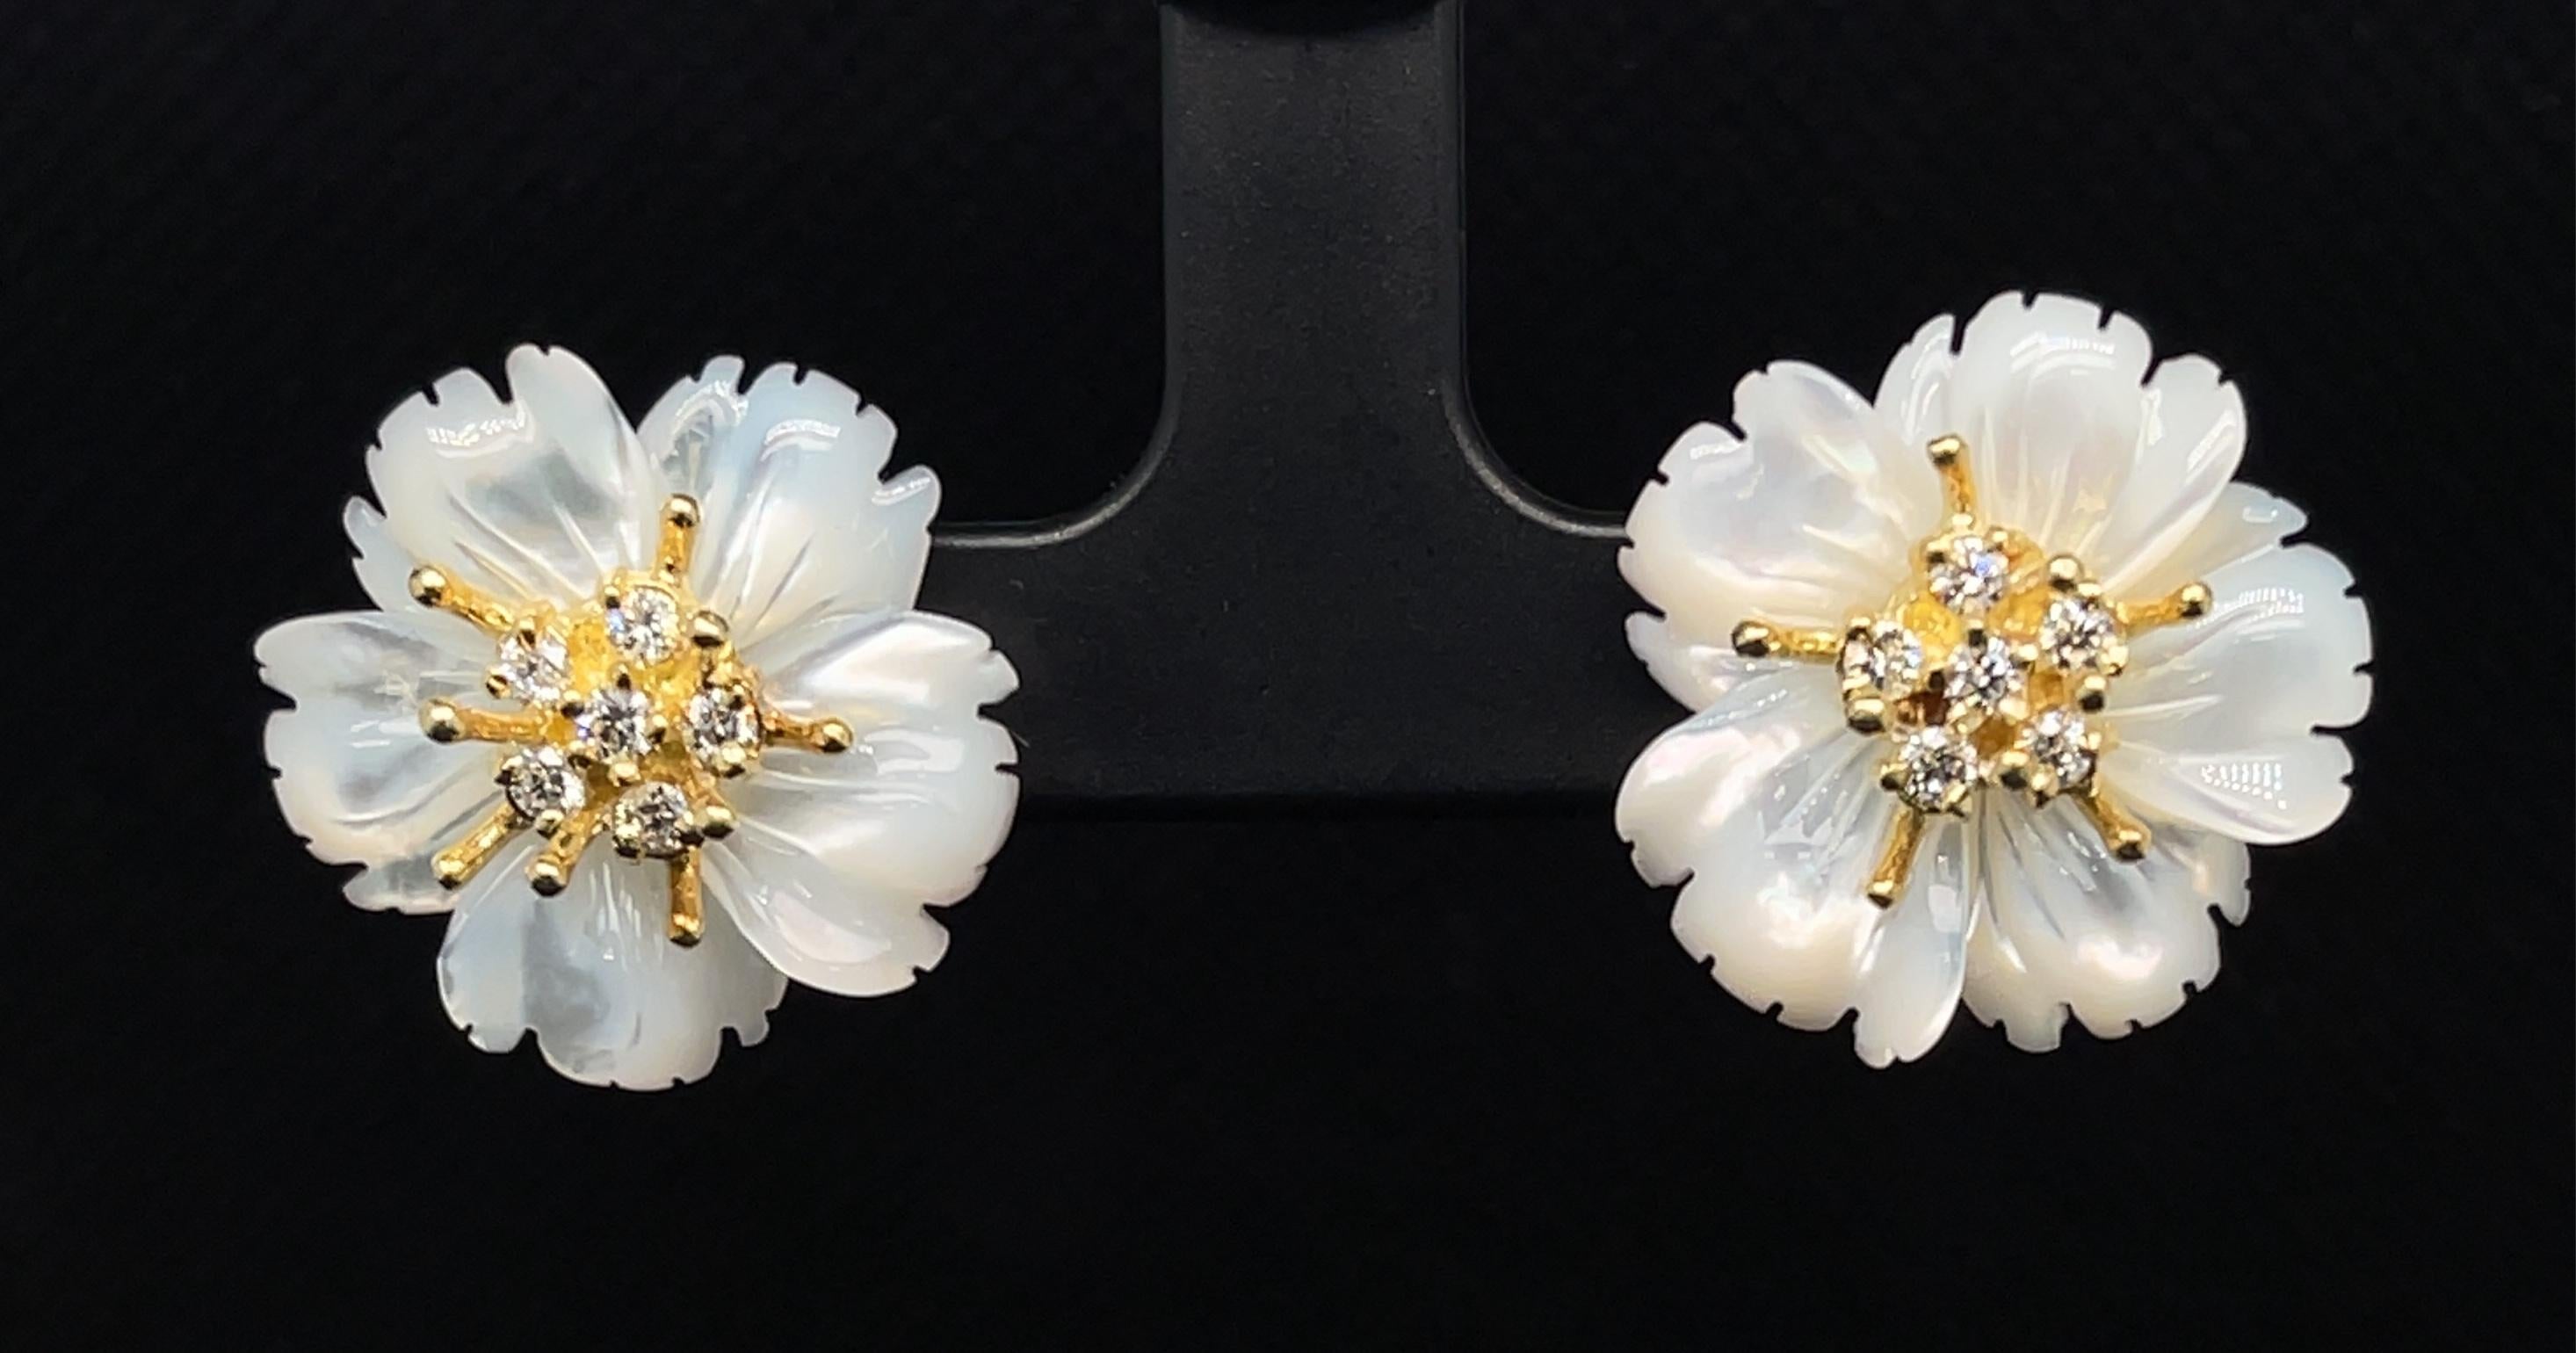 These finely hand-carved mother-of-pearl earring jackets will add elegant and eye-catching style to your jewelry wardrobe! The 3-dimensional flowers were intricately carved from mother-of-pearl and look stunning paired with our 18 yellow gold post